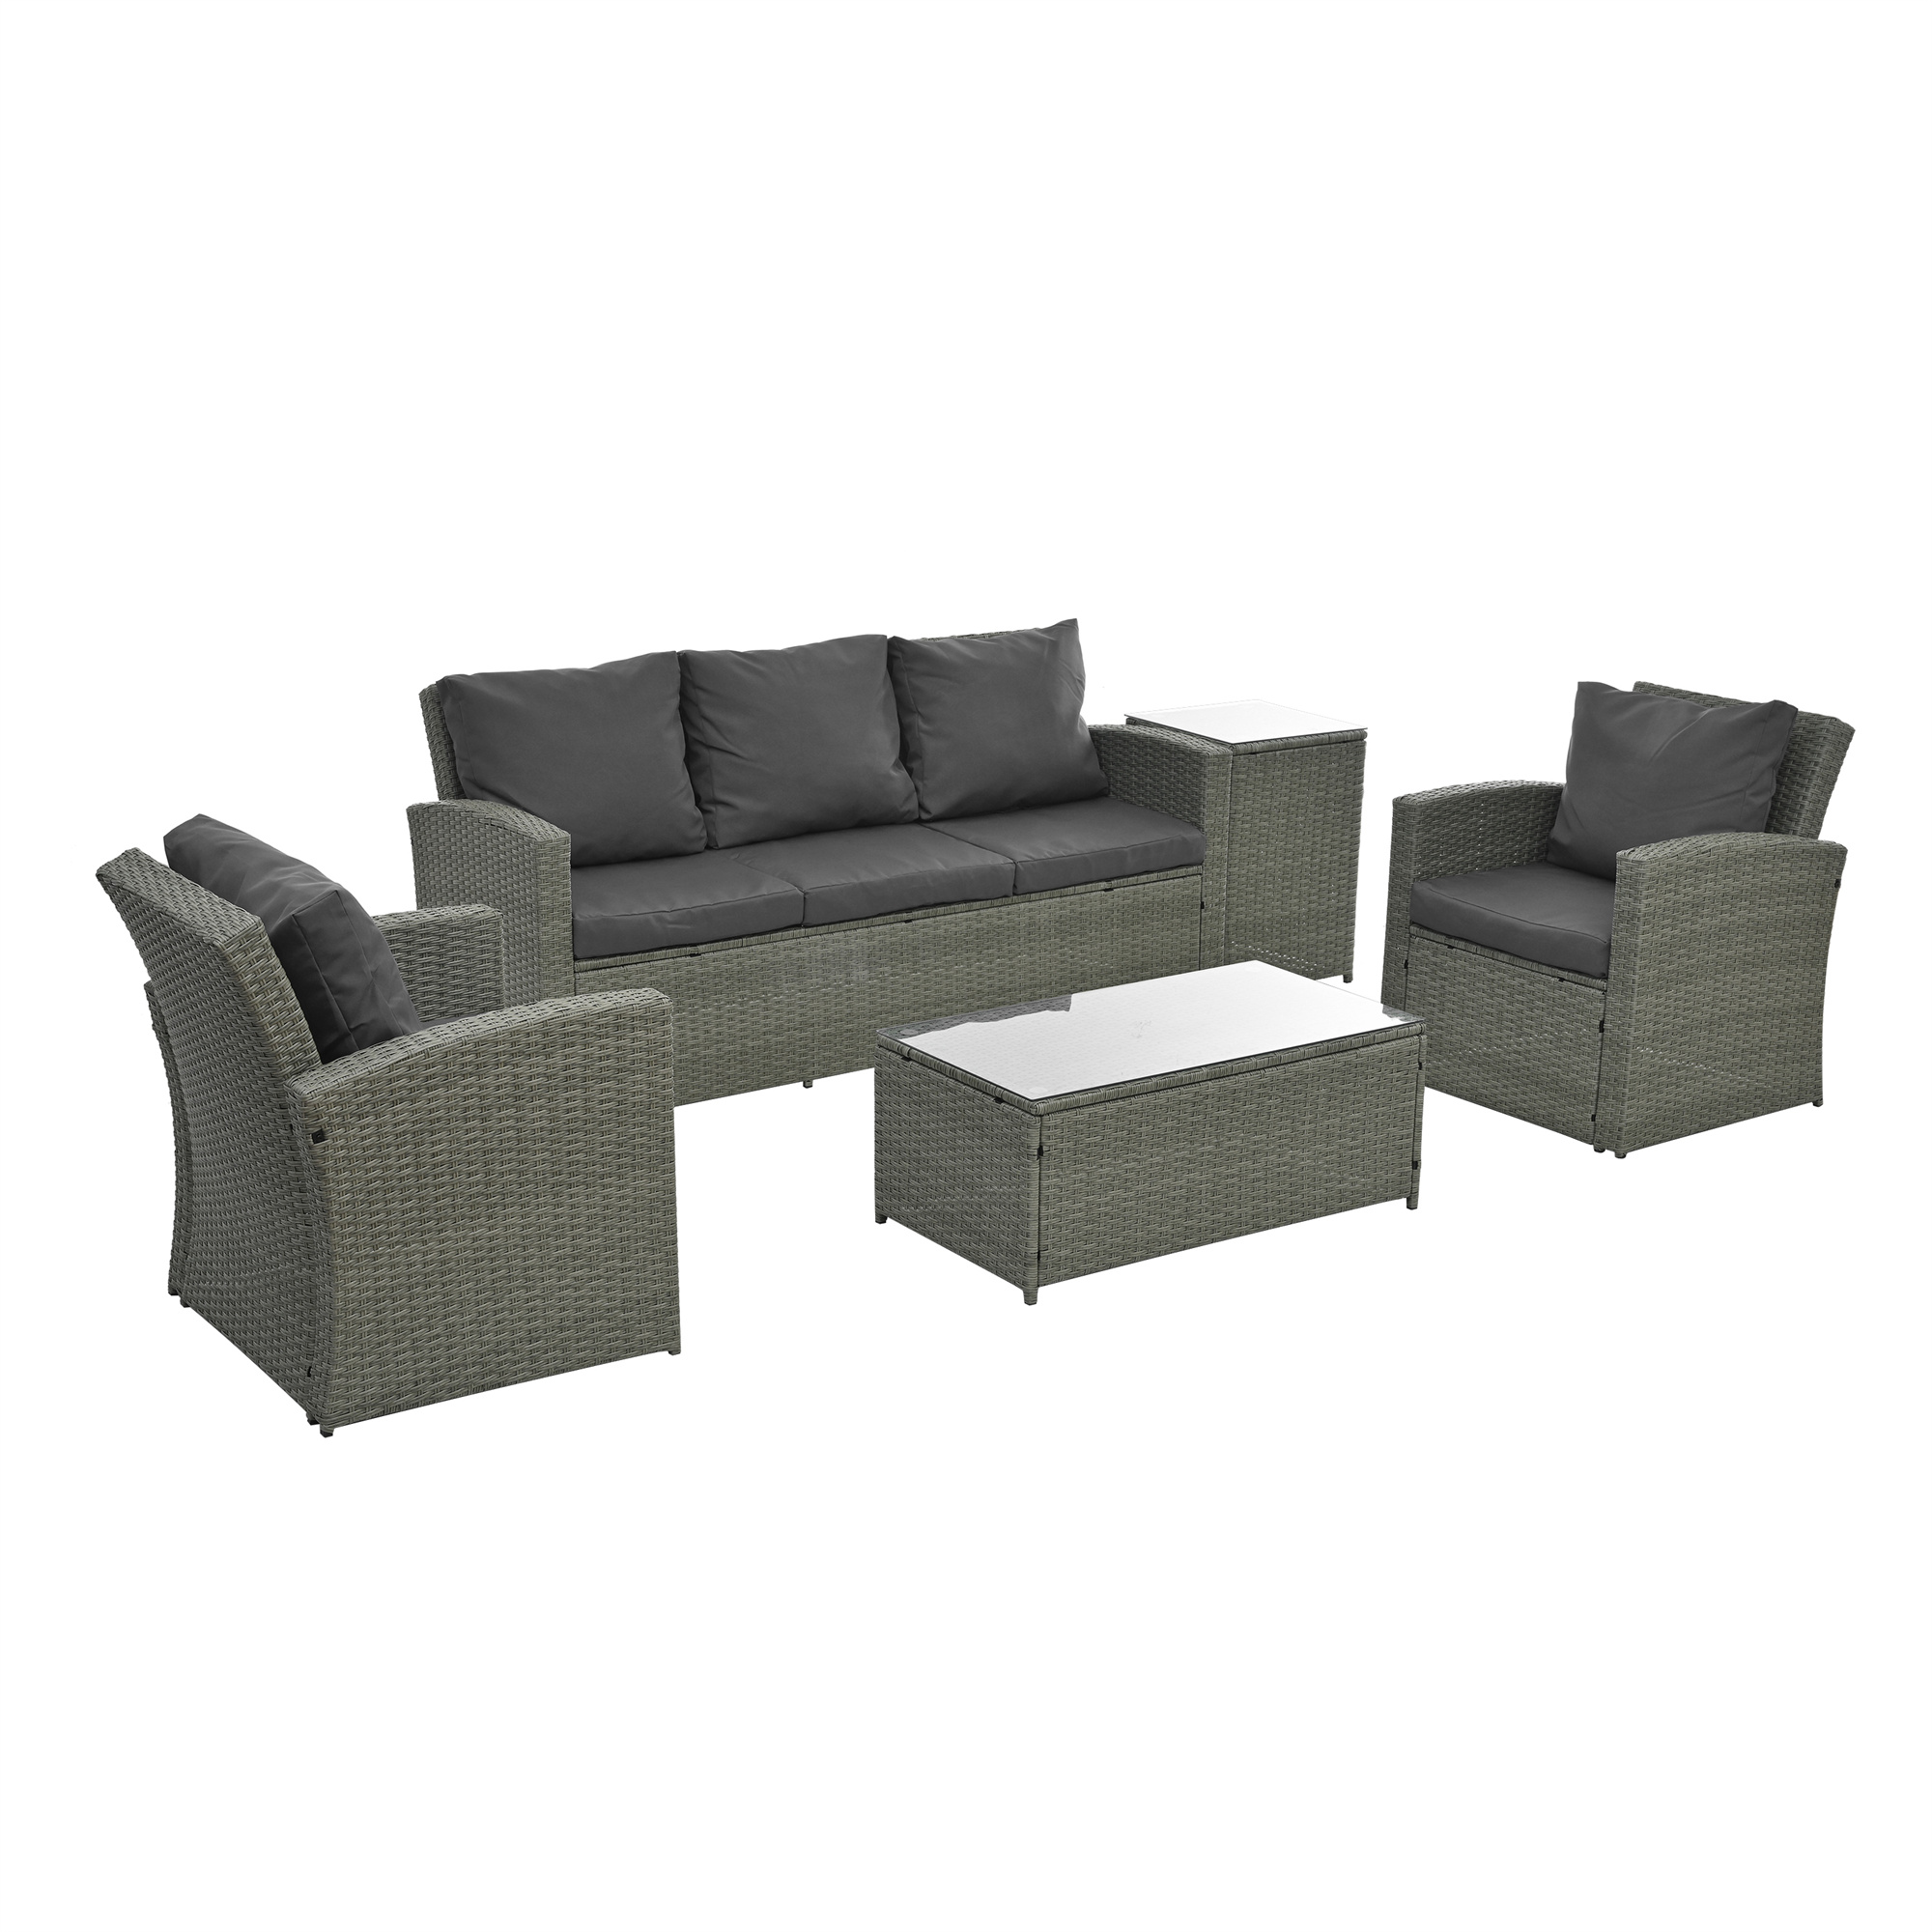 Highsound 5 Pieces Patio Furniture Set, All-Weather PE Rattan Wicker Patio Conversation Set, Cushioned Sofa Set with 2 Glass Tables for Patio Garden Poolside Deck, Gray Cushions - image 4 of 9